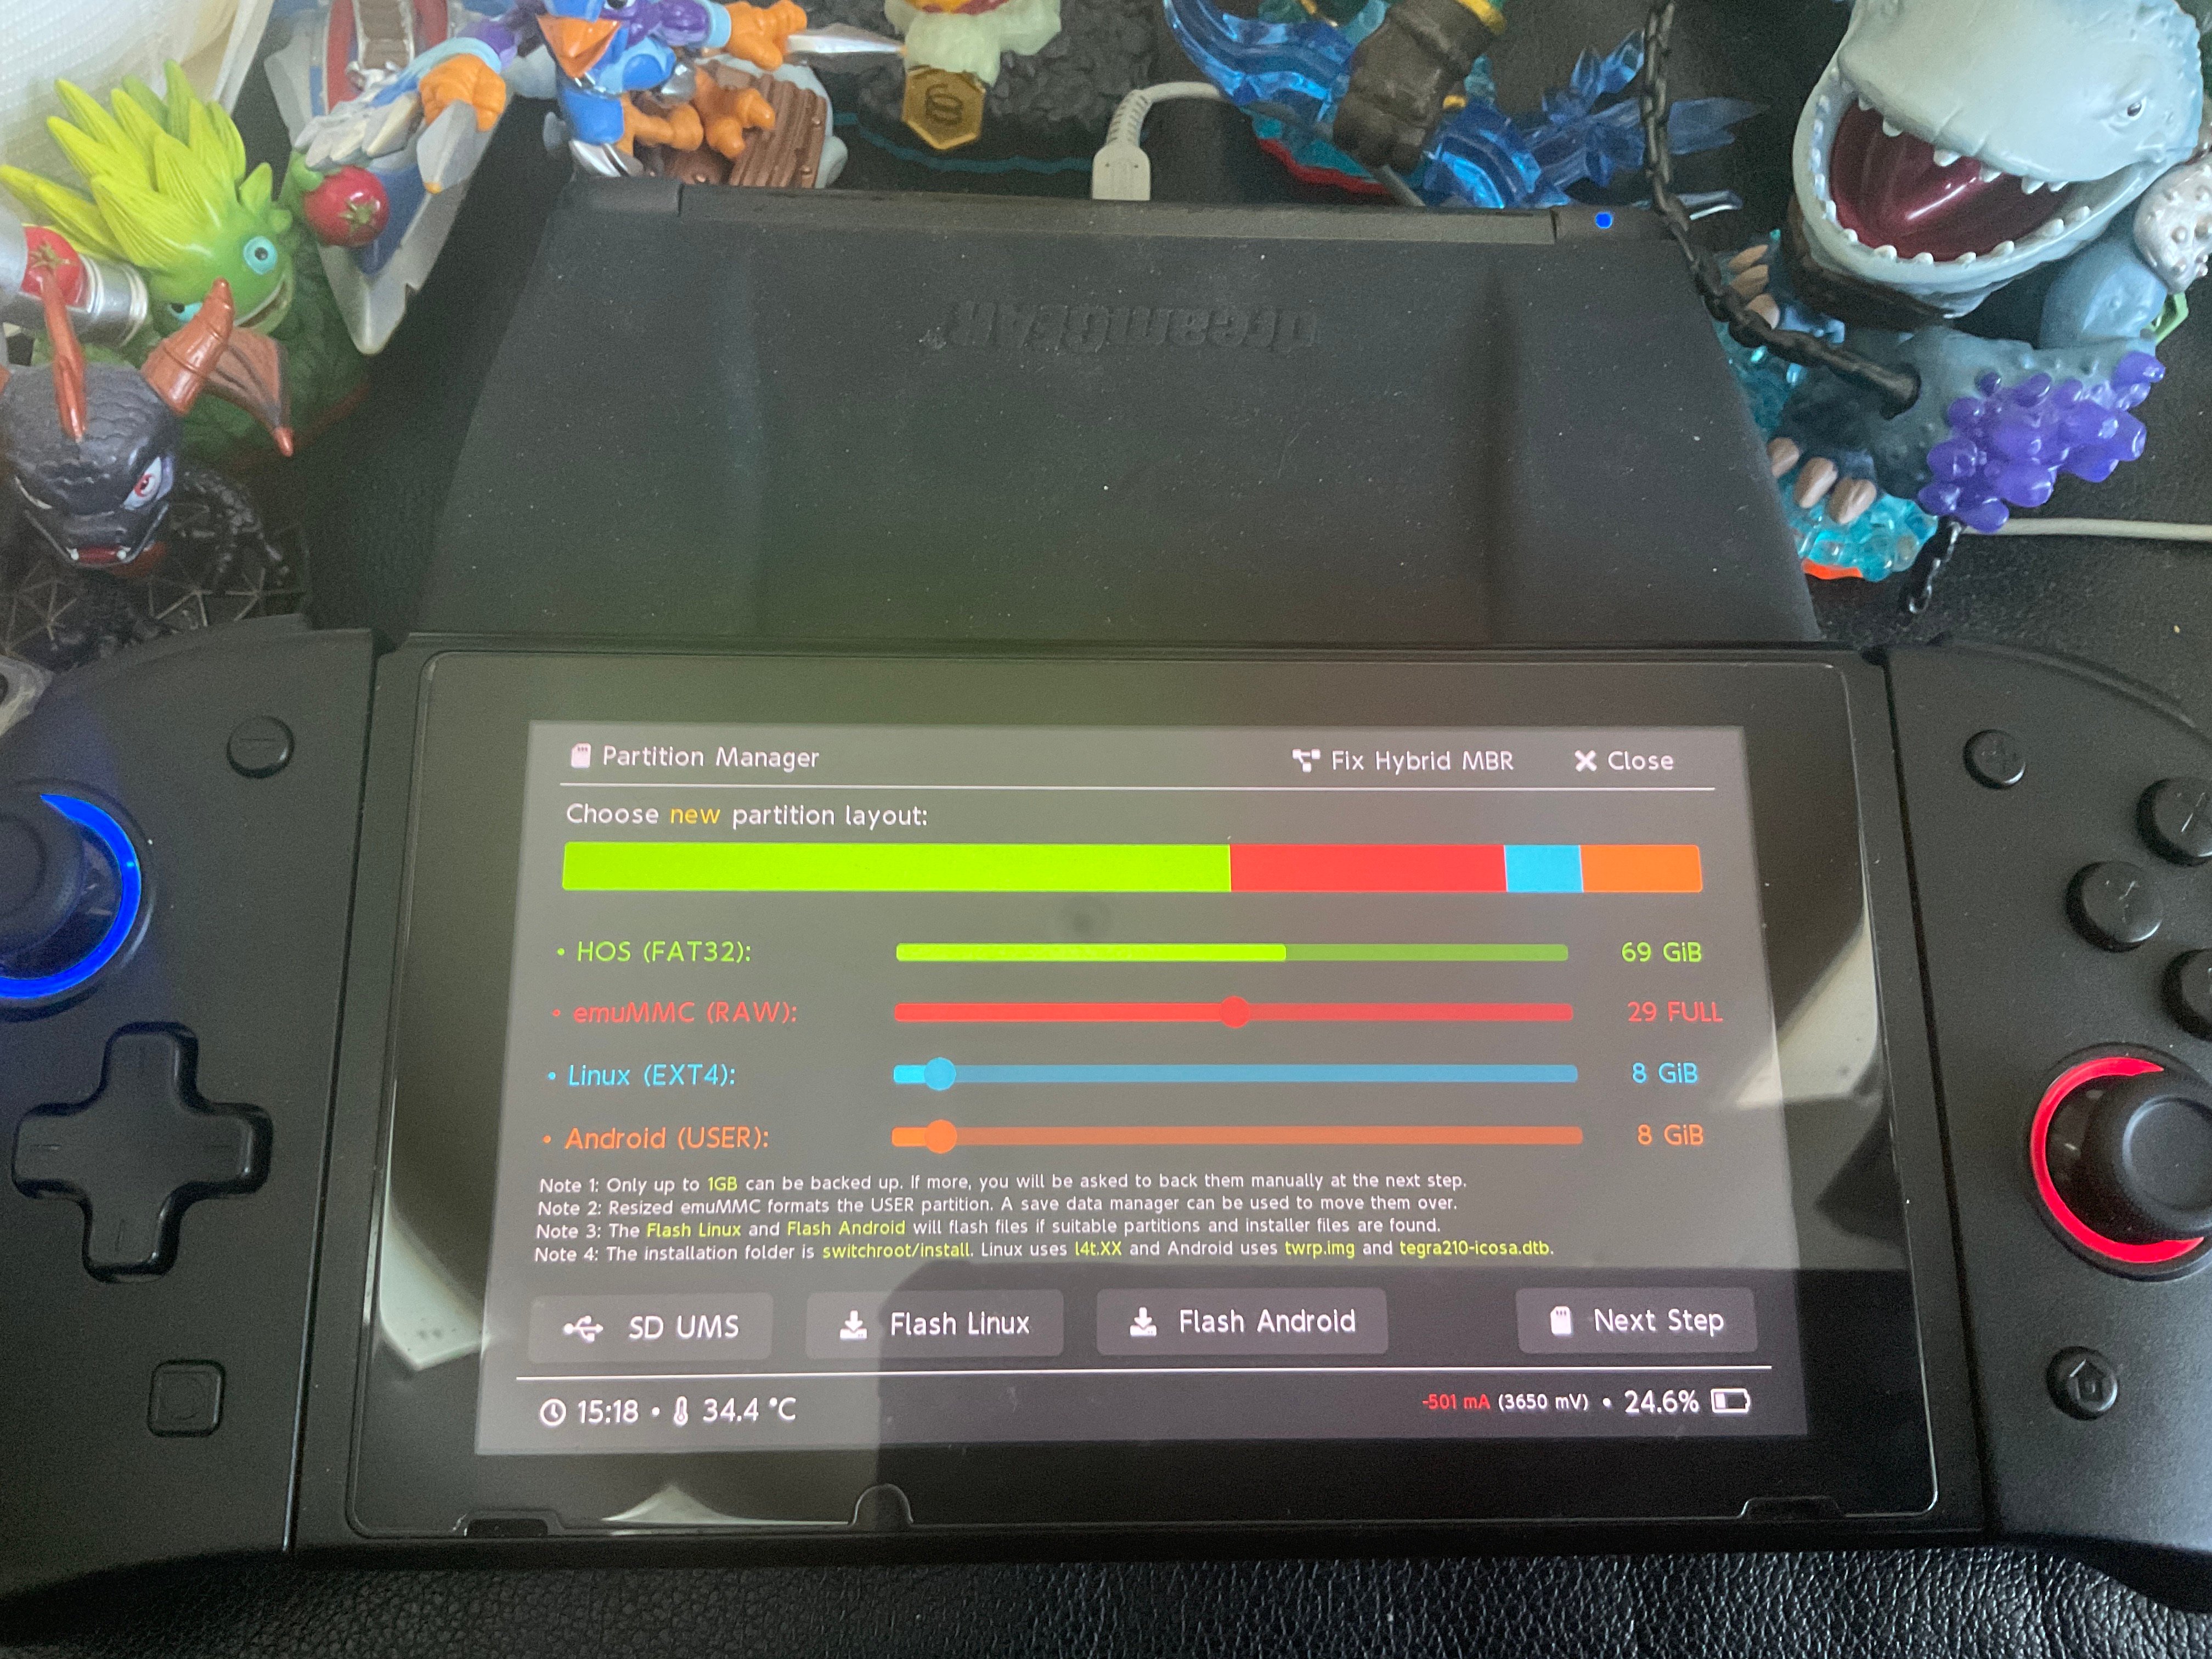 2 Best Wii U Emulators You Can Try - MiniTool Partition Wizard